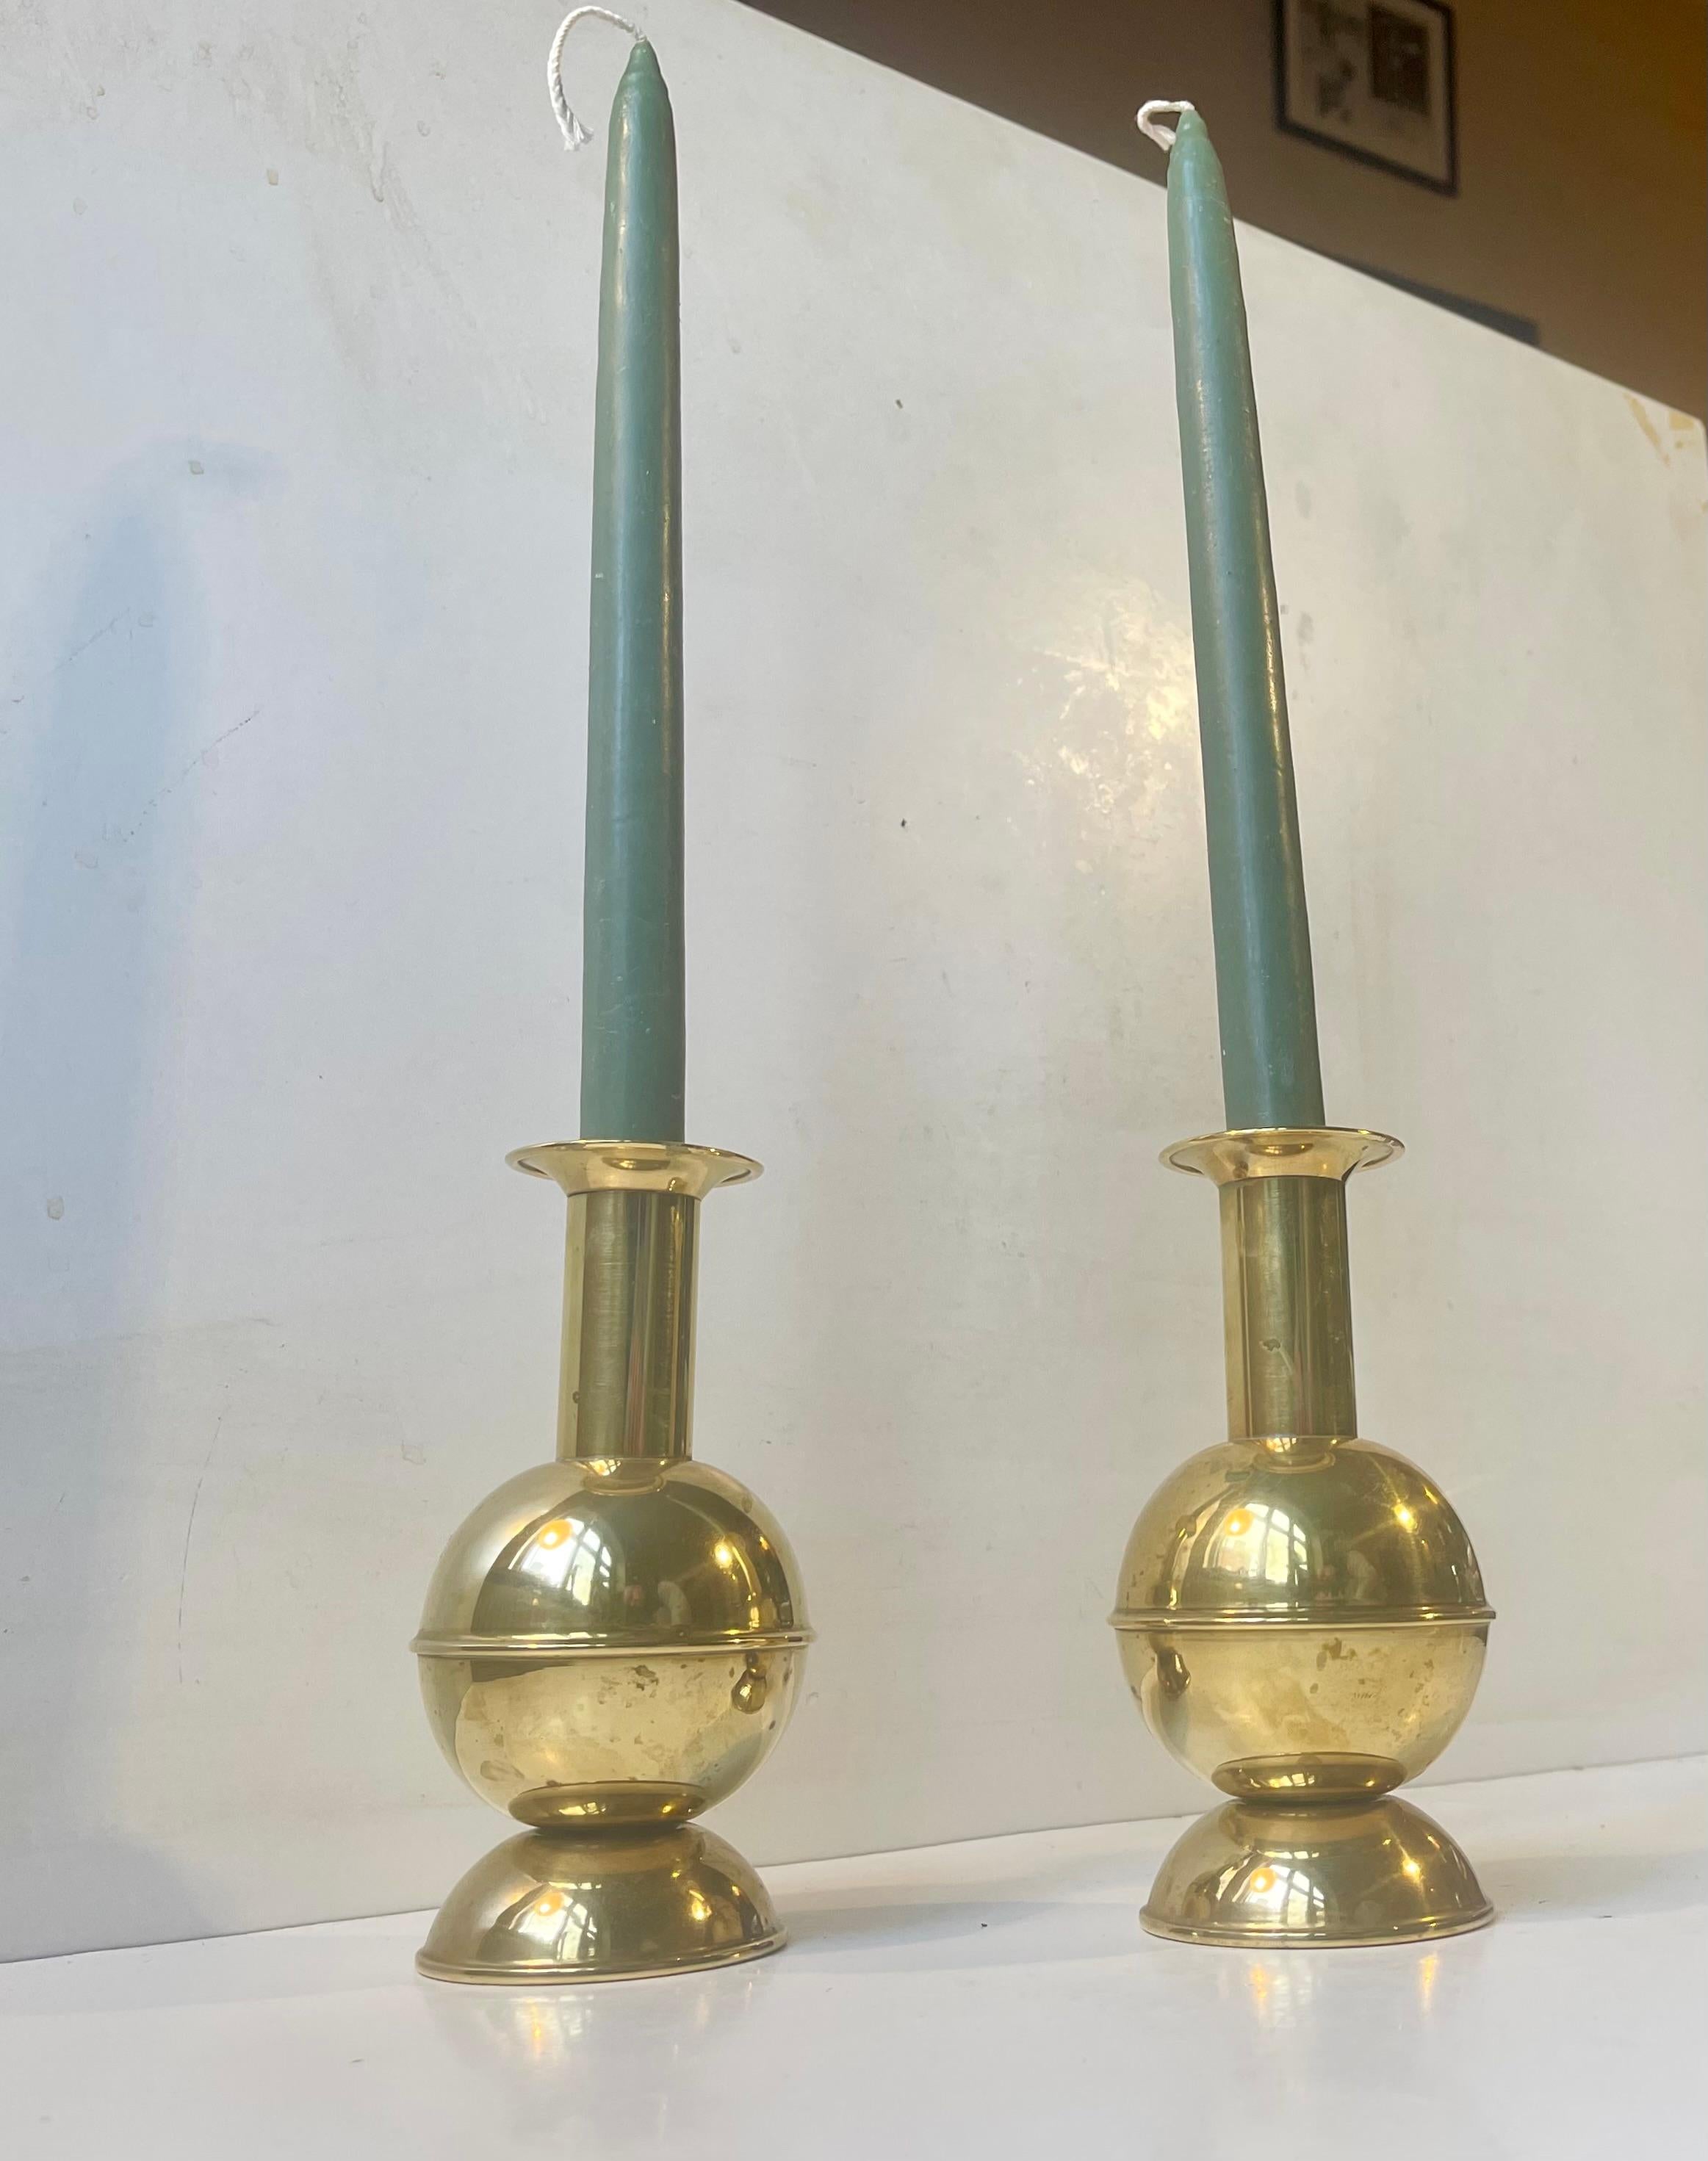 Architectural Scandinavian Candlesticks in Brass, 1970s For Sale 1